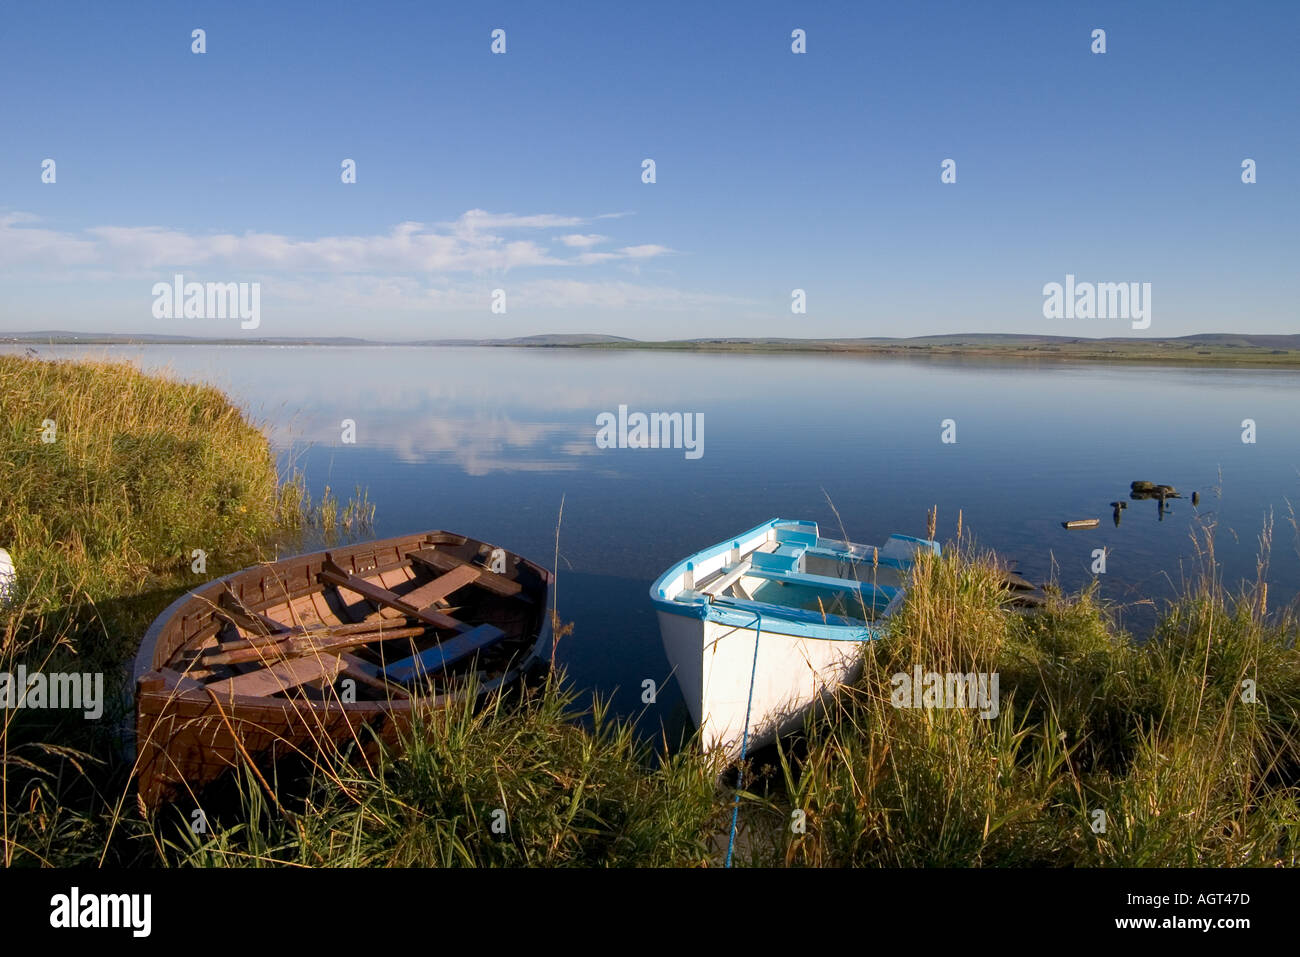 dh Loch of Harray STENNESS ORKNEY Fishing boats beach on grassy shore rowing boat quiet scotland Stock Photo